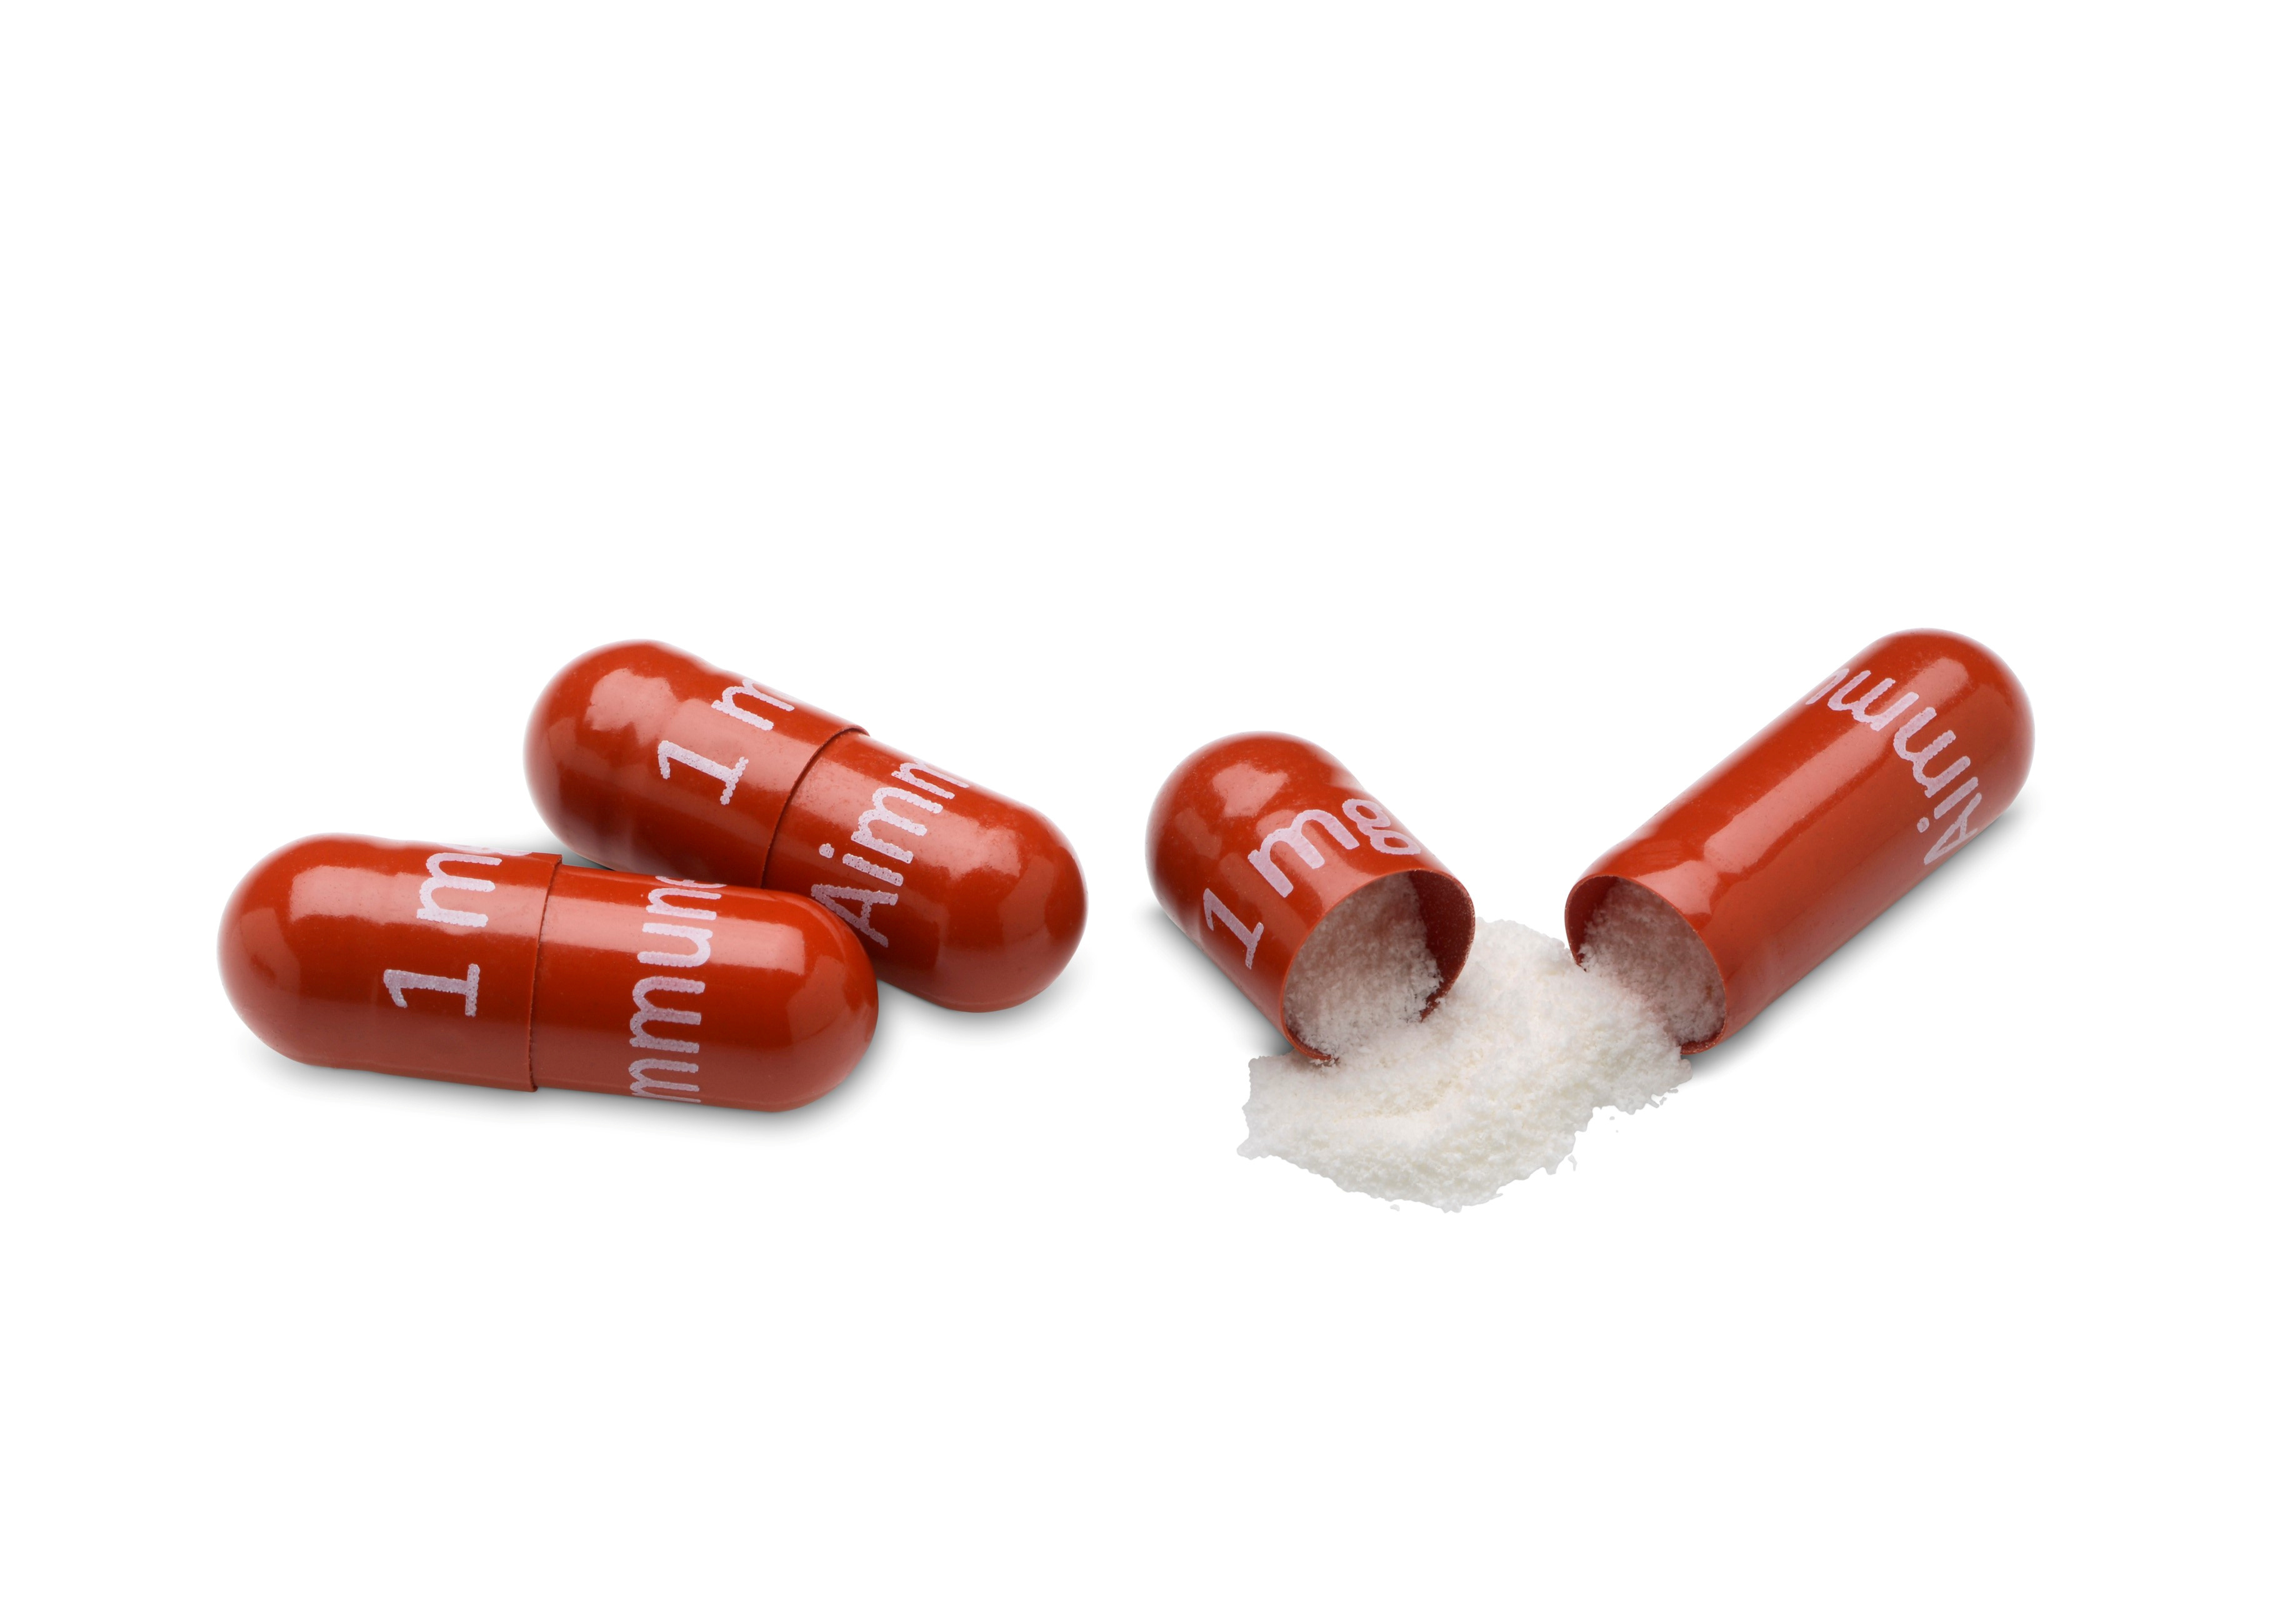 Capsules of Palforzia are shown containing pharmaceutical grade peanut powder, for use in oral immunotherapy among patients with peanut allergies, manufactured by Aimmune Therapeutics